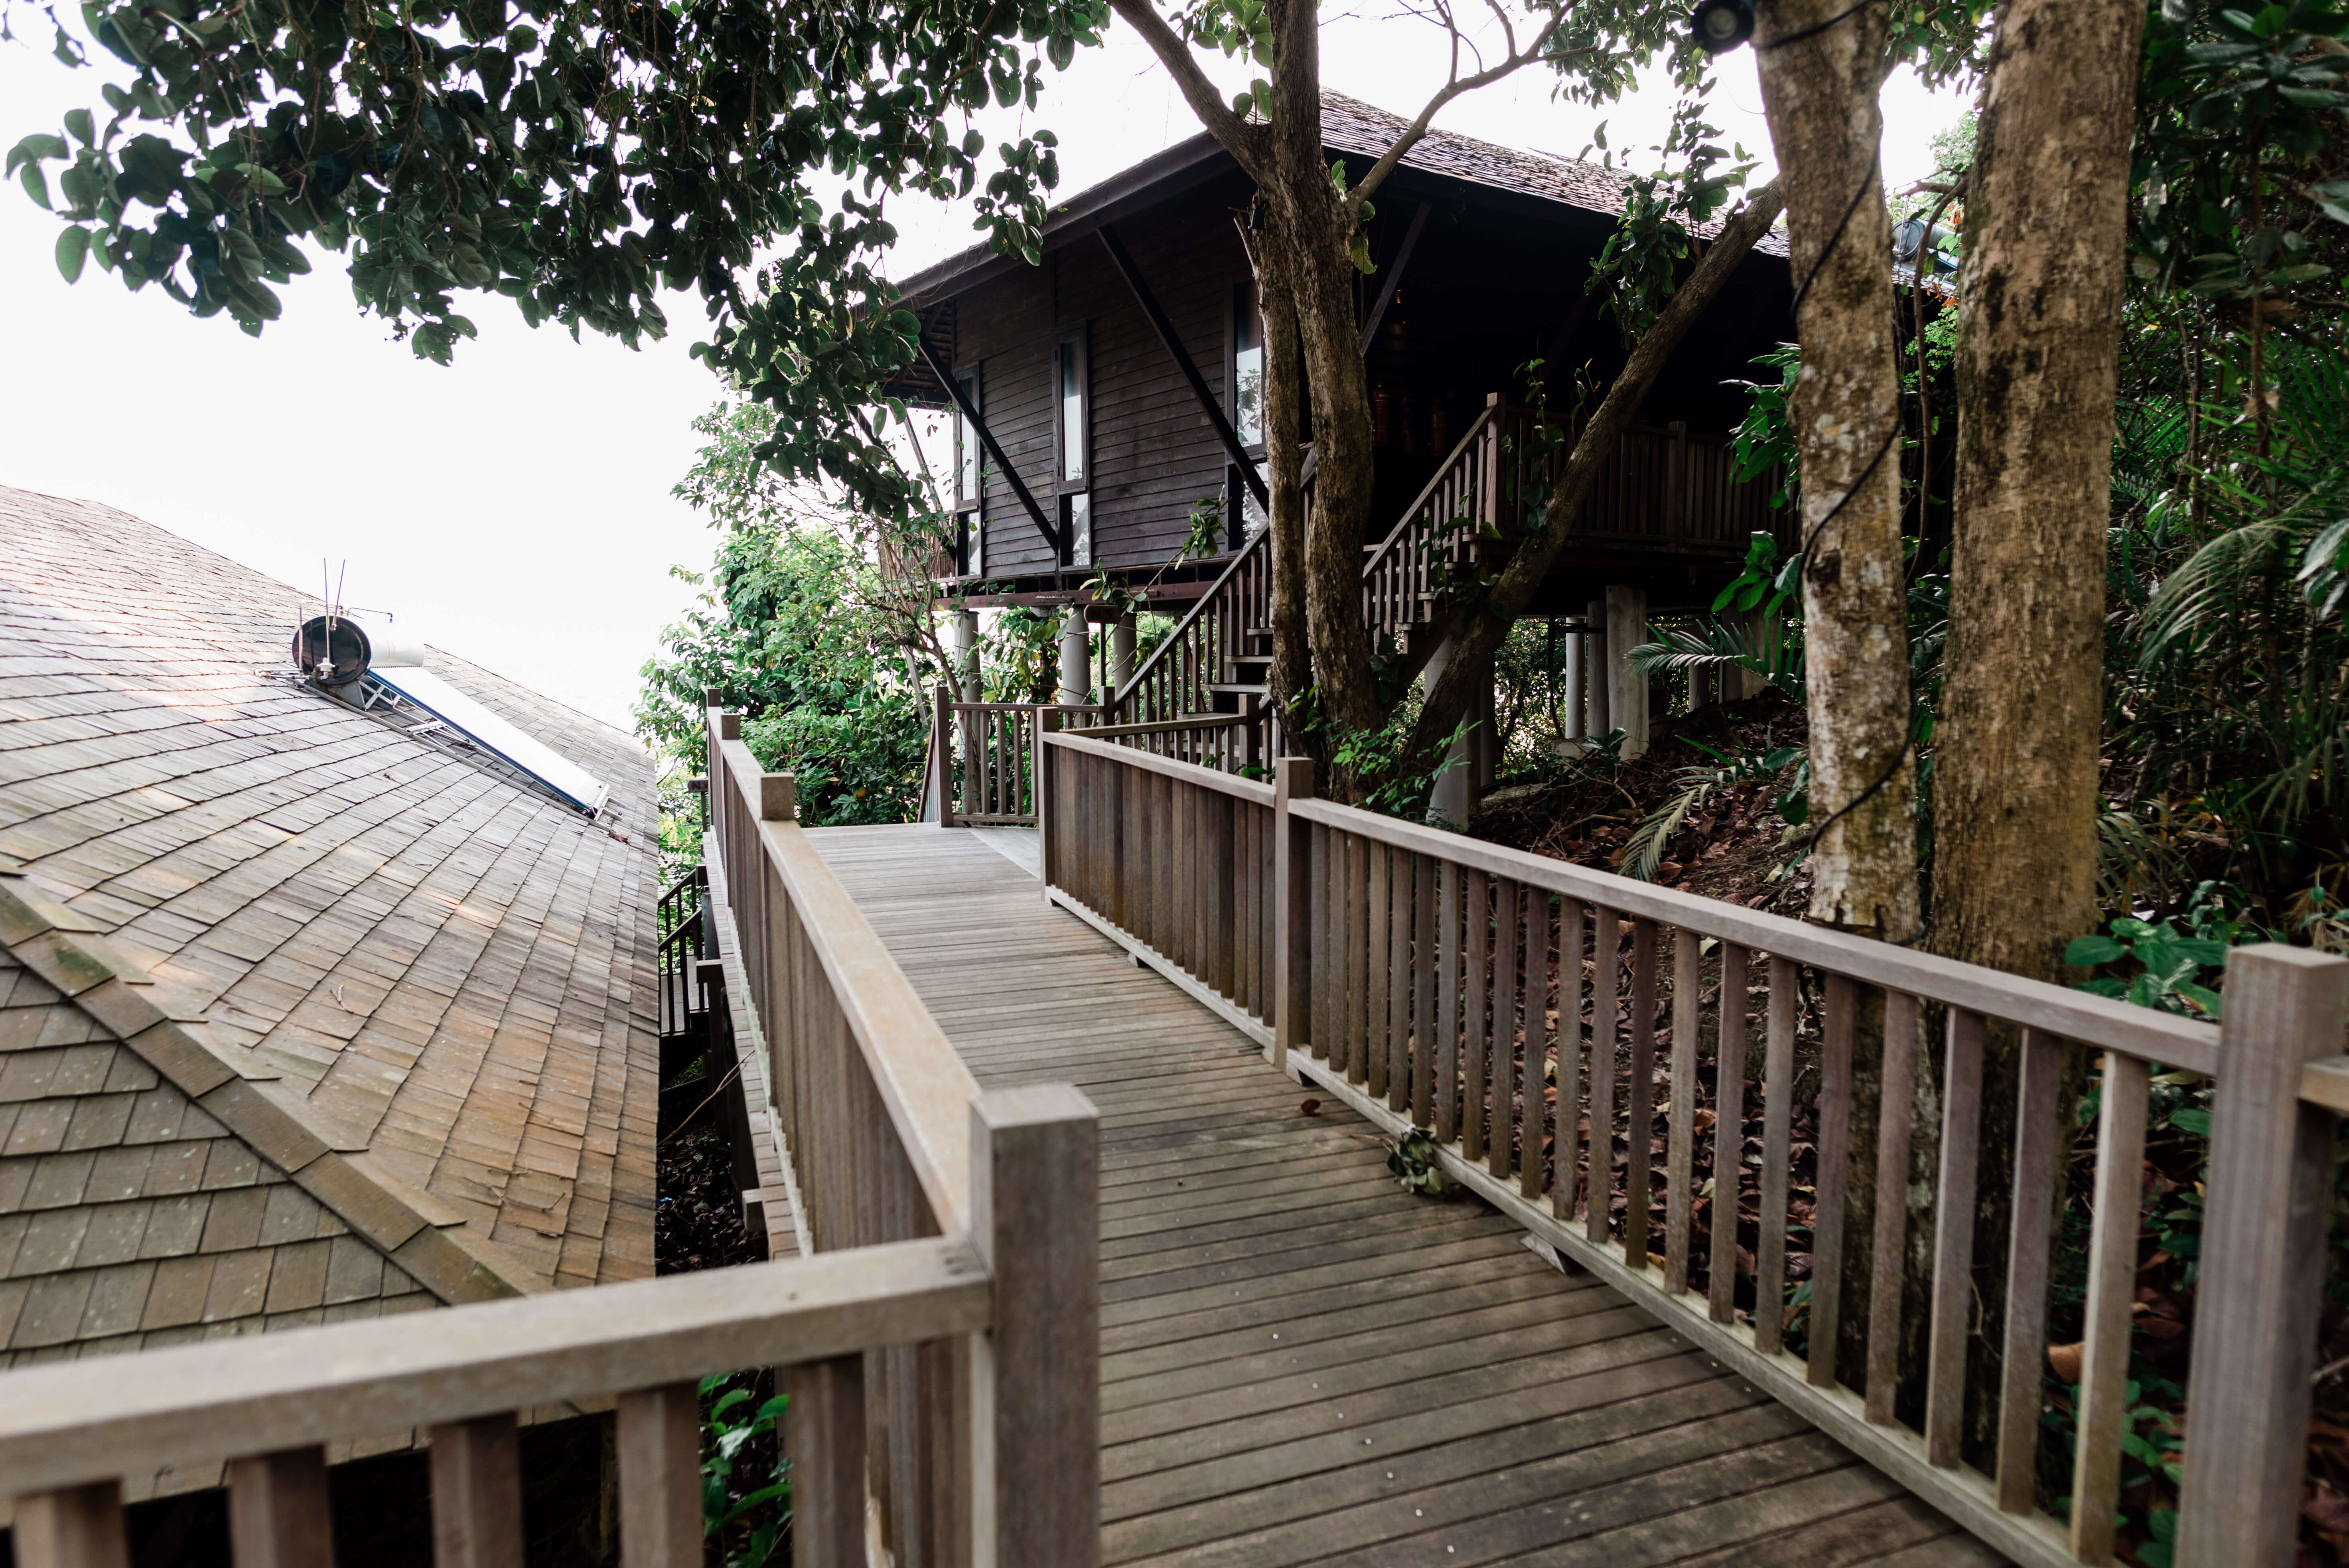 The resort operates on a “tread lightly” motto. The number of villas is deliberately kept small (22) to minimise impact on the environment, and effort was made to fell as little trees as possible during construction. Photo by Kenny Ng 